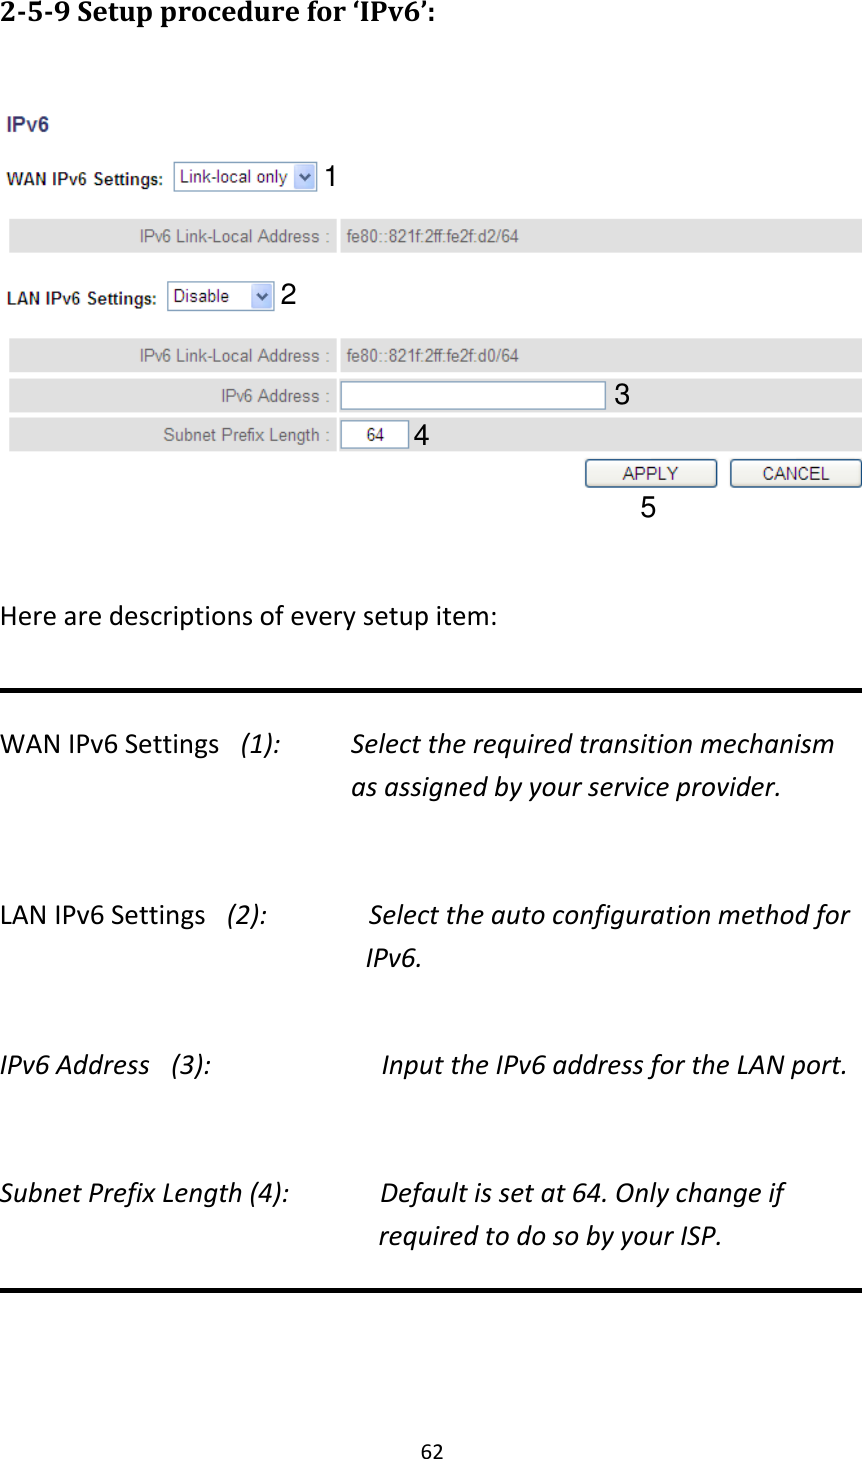 62 2-5-9 Setup procedure for ‘IPv6’:    Here are descriptions of every setup item:  WAN IPv6 Settings   (1):    Select the required transition mechanism as assigned by your service provider.  LAN IPv6 Settings   (2):              Select the auto configuration method for     IPv6.  IPv6 Address   (3):                      Input the IPv6 address for the LAN port.  Subnet Prefix Length (4):         Default is set at 64. Only change if                                                                   required to do so by your ISP.            1 2 3 4 5 